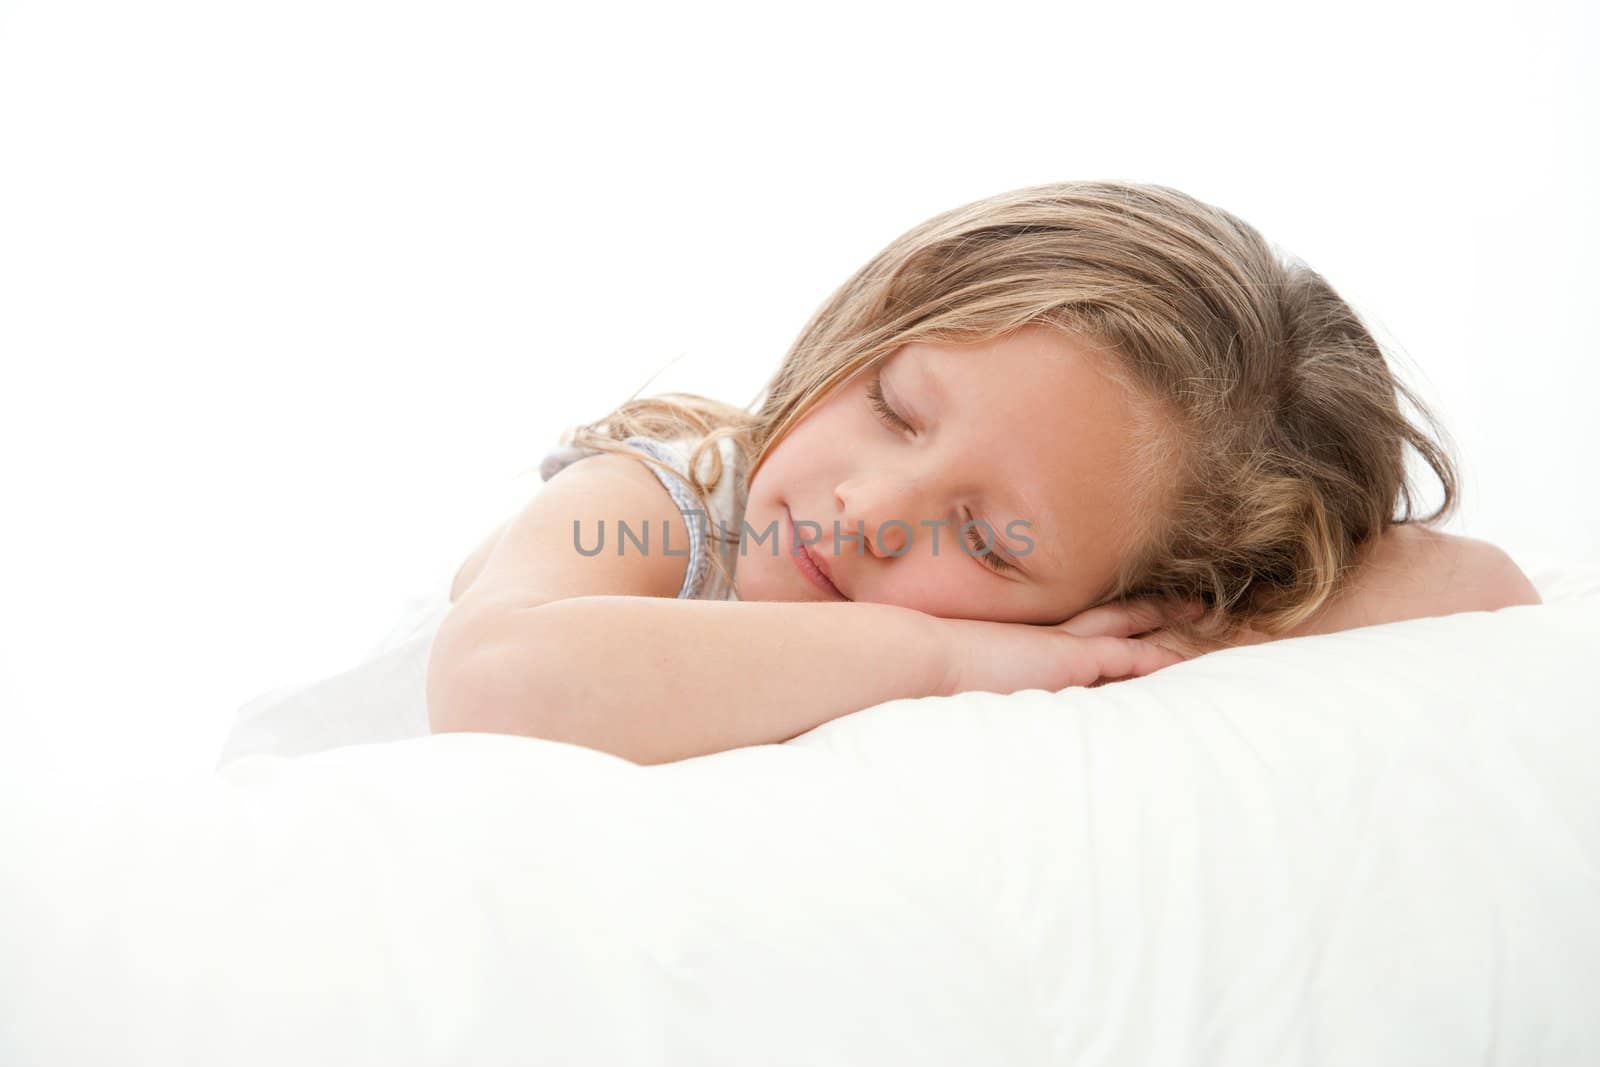 High key Close up portrait  of cute little girl sleeping. Isolated on white background.